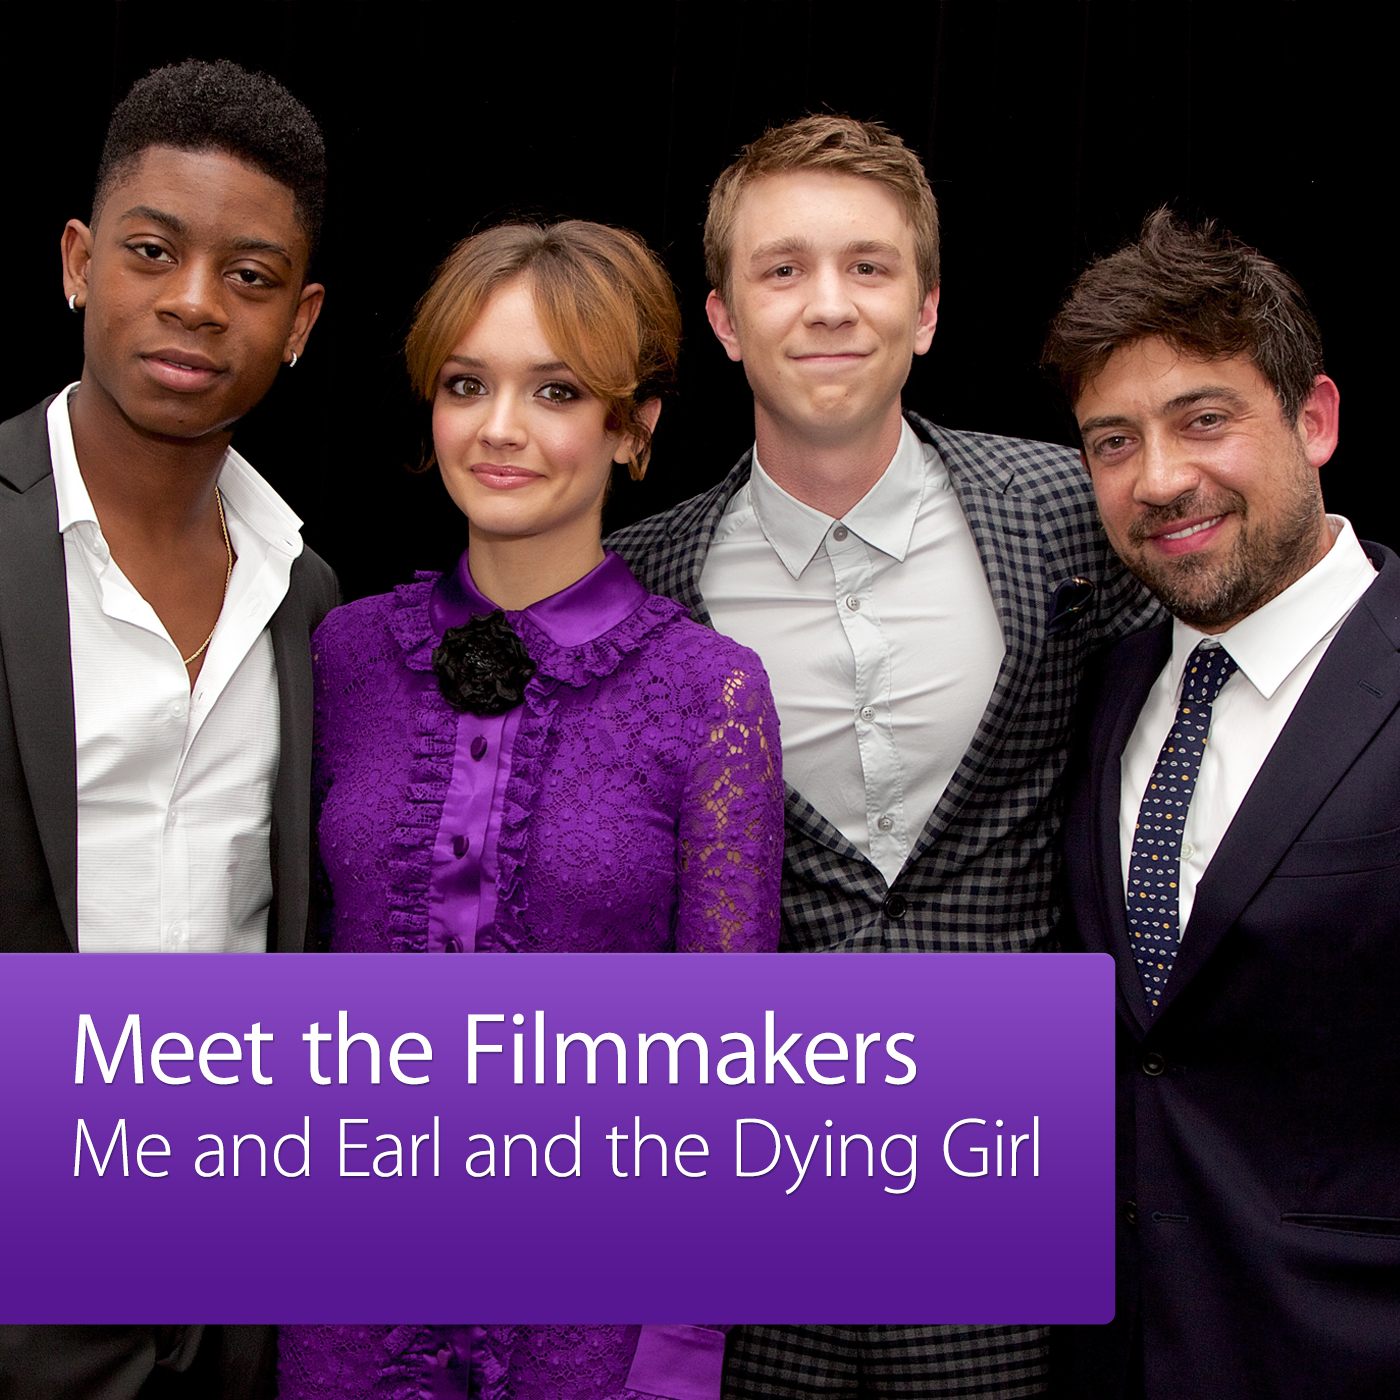 Me and Earl and the Dying Girl: Meet the Filmmaker